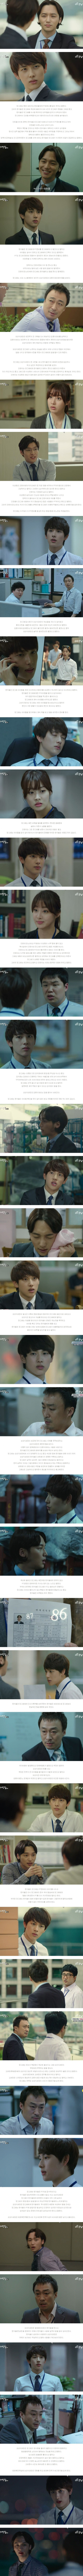 episodes 3 and 4 captures for the Korean drama 'Incomplete Life'